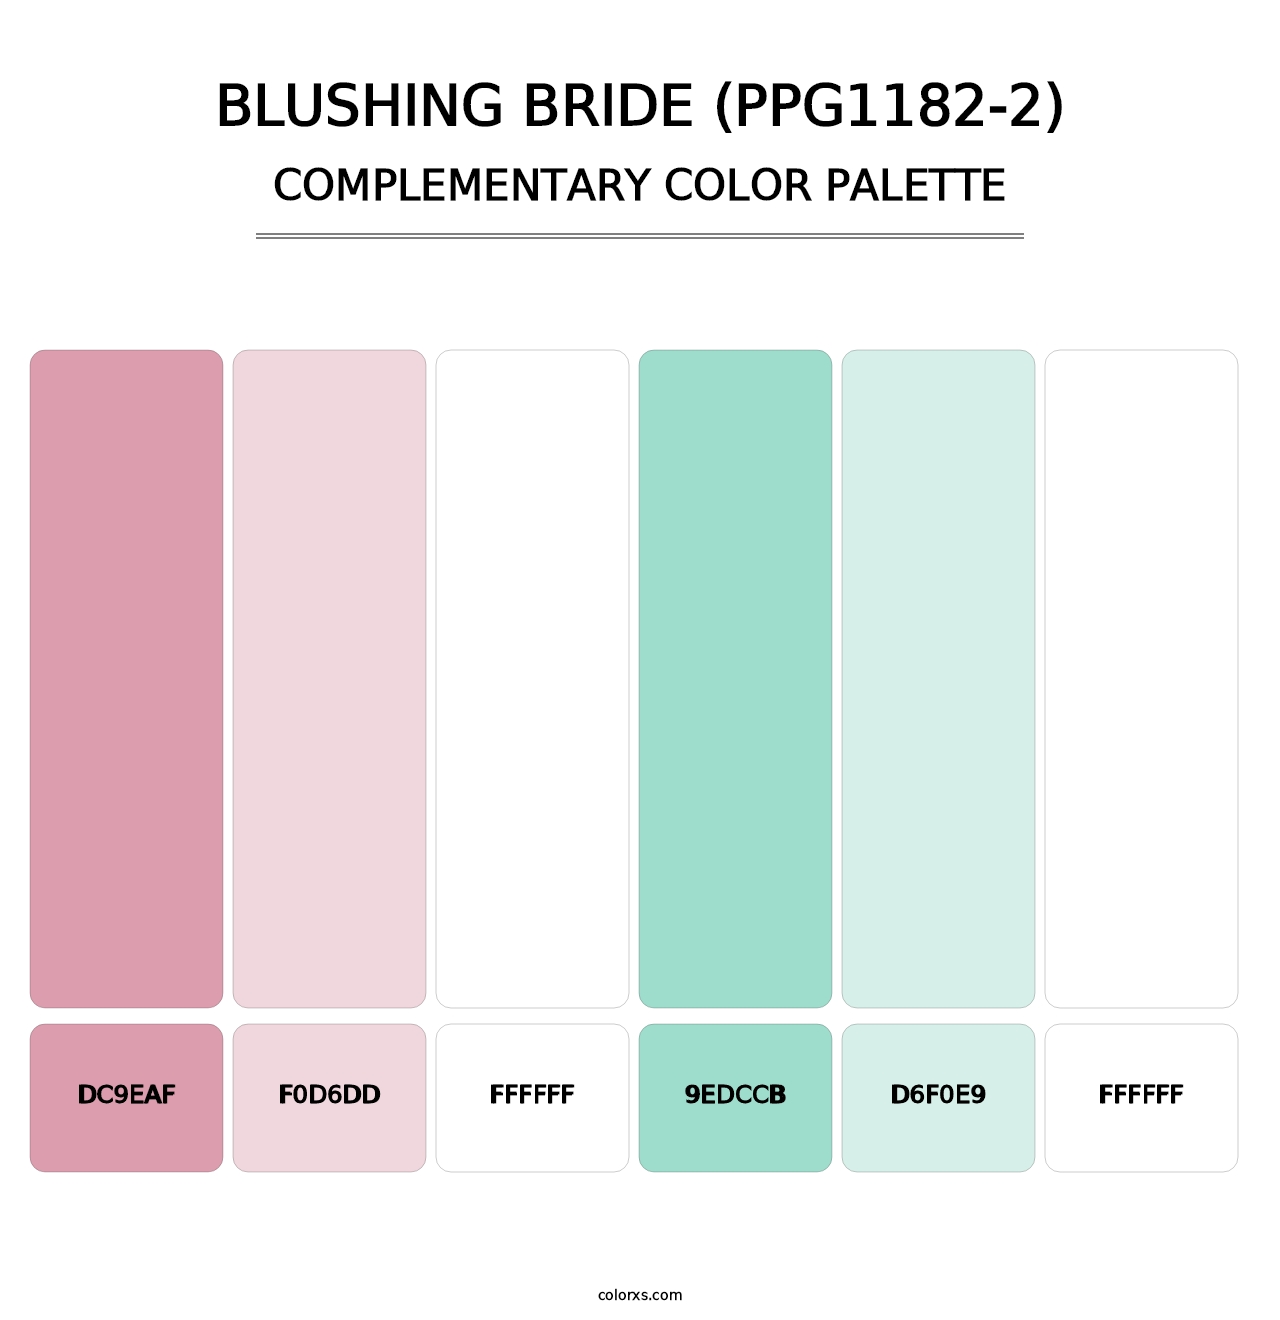 Blushing Bride (PPG1182-2) - Complementary Color Palette